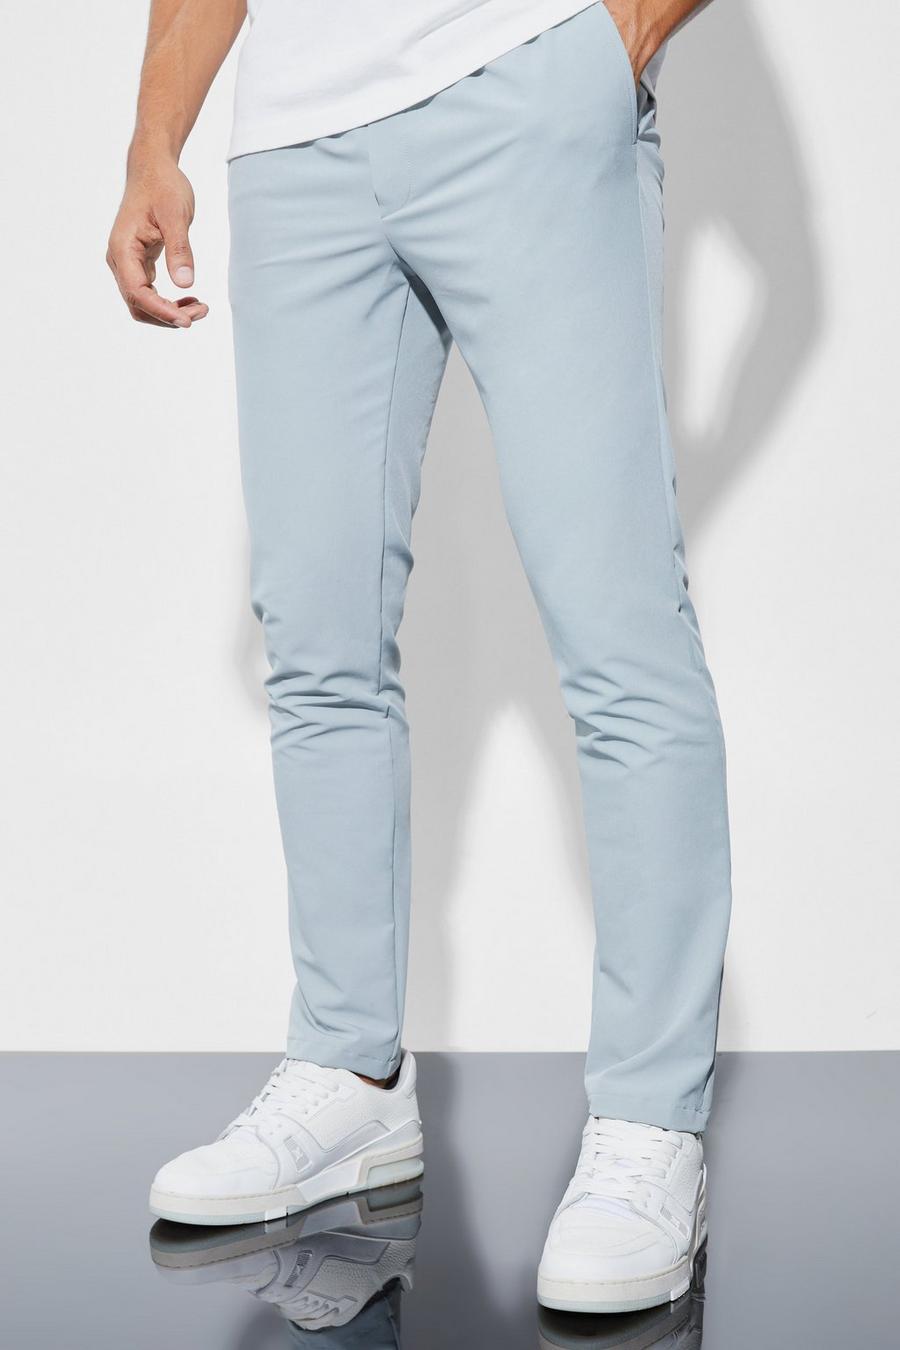 Buy Blue Slim Stretch Smart Trousers from the Next UK online shop